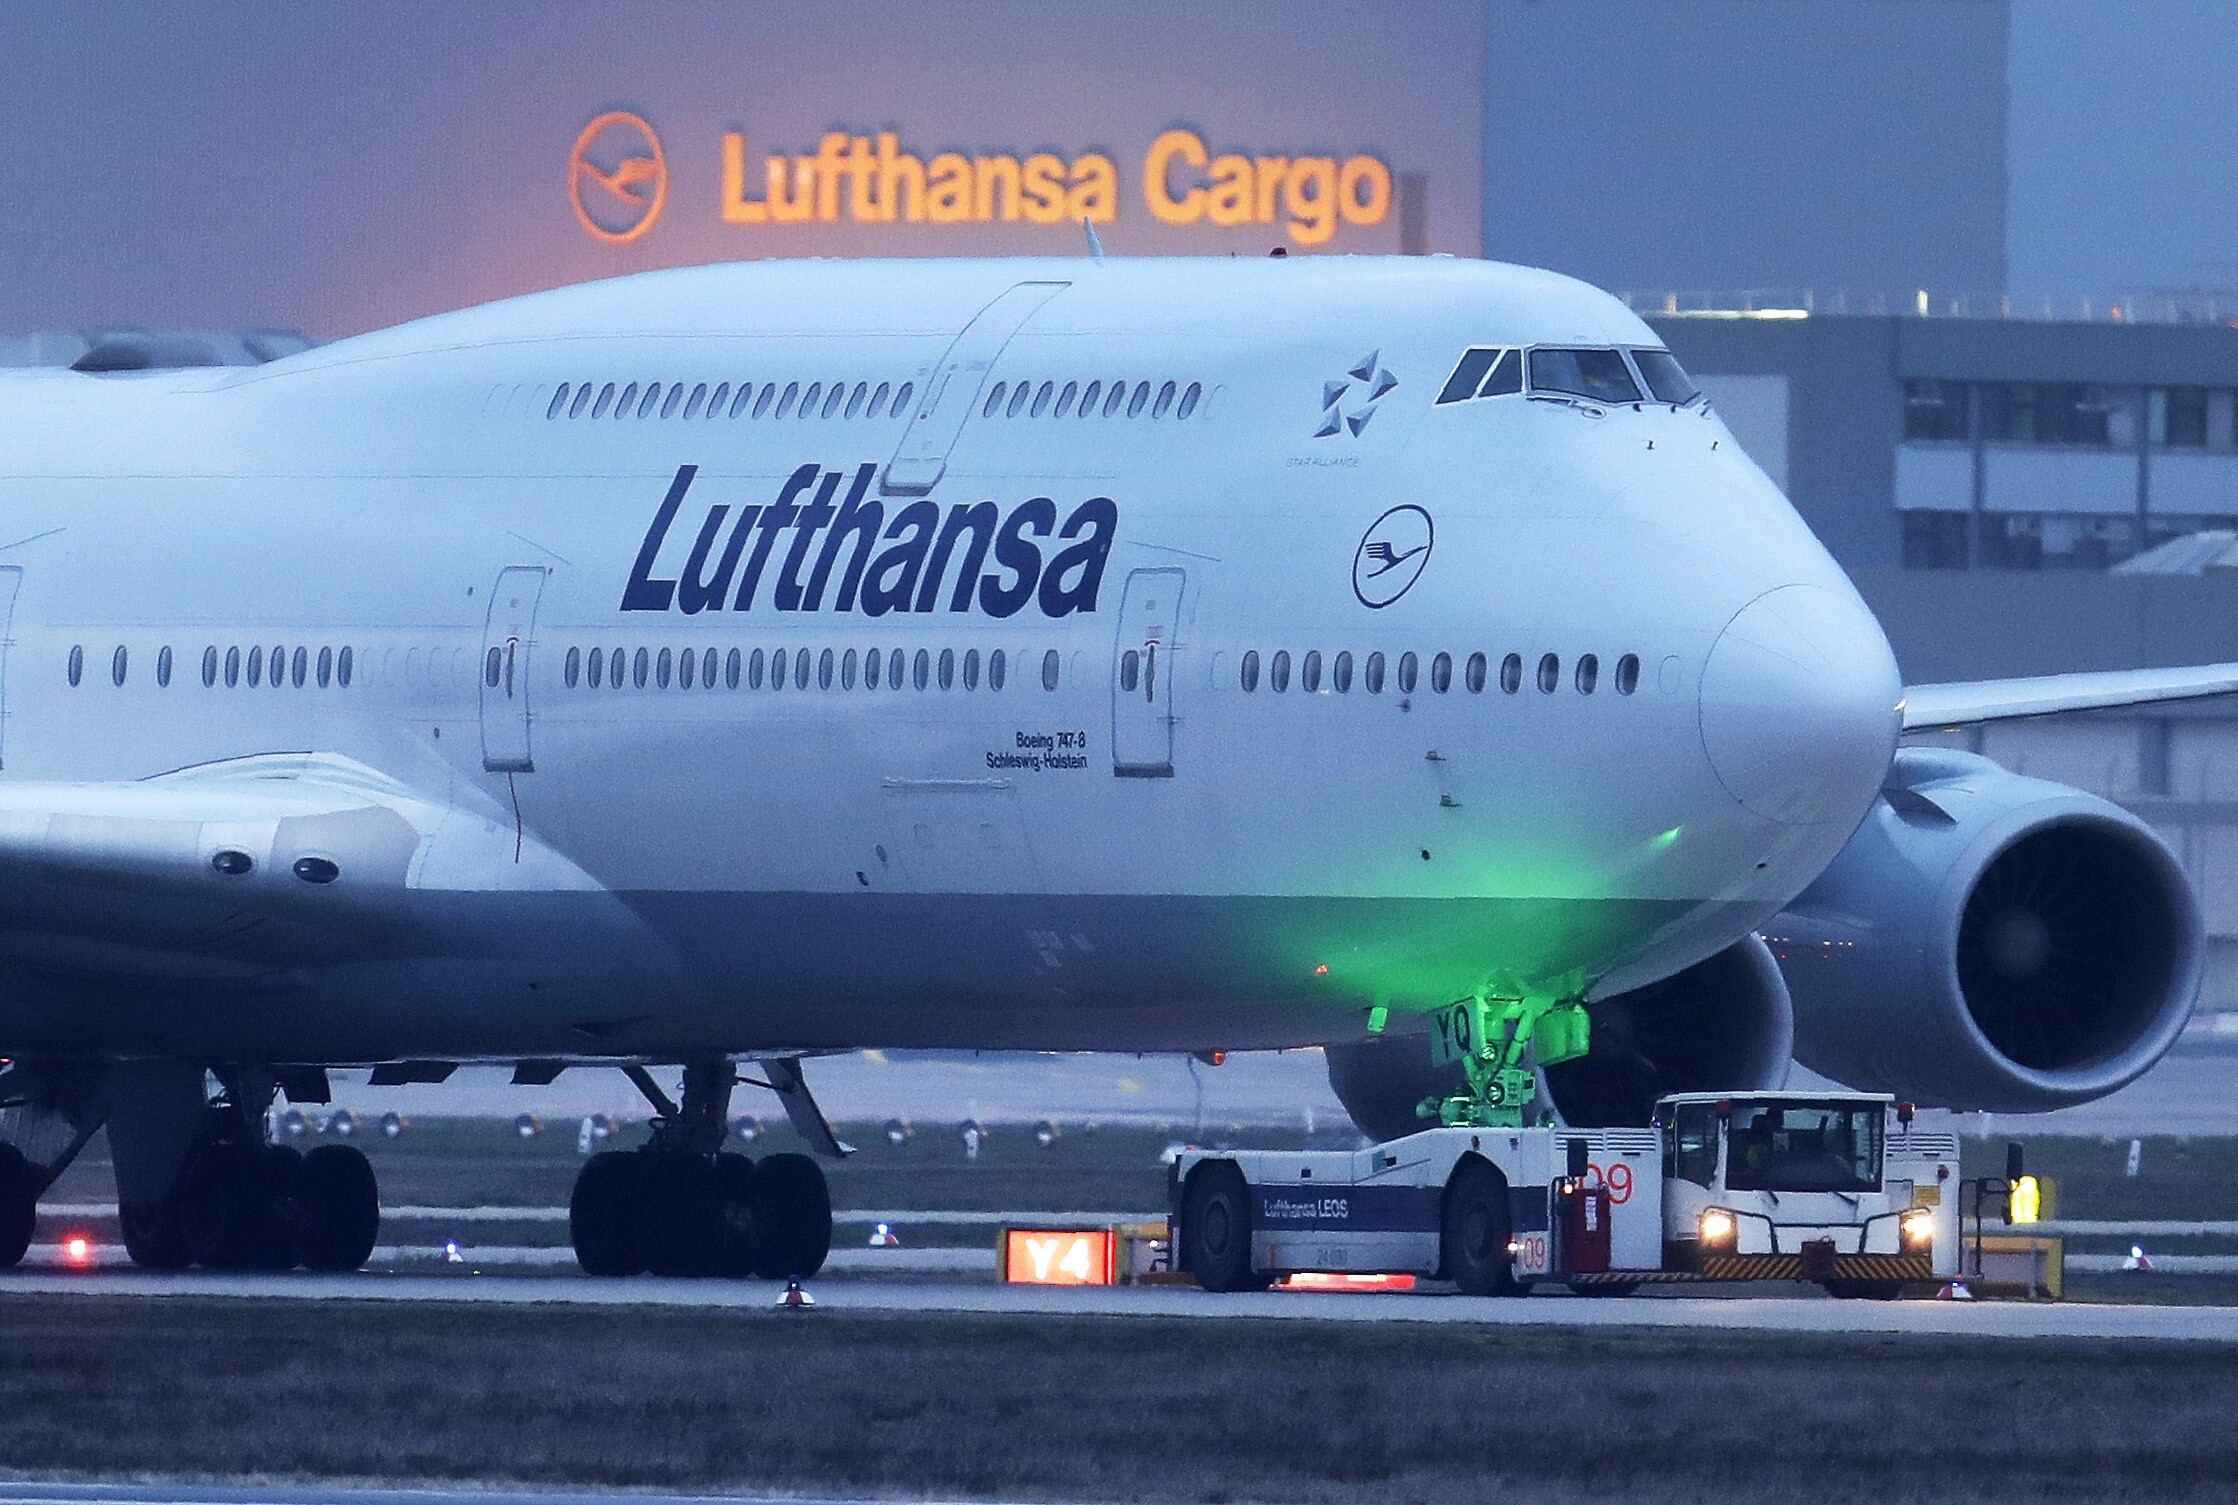 A Lufthansa Boeing 747 aircraft rolls over the tarmac at the airport in Frankfurt, Germany. Photo: AP